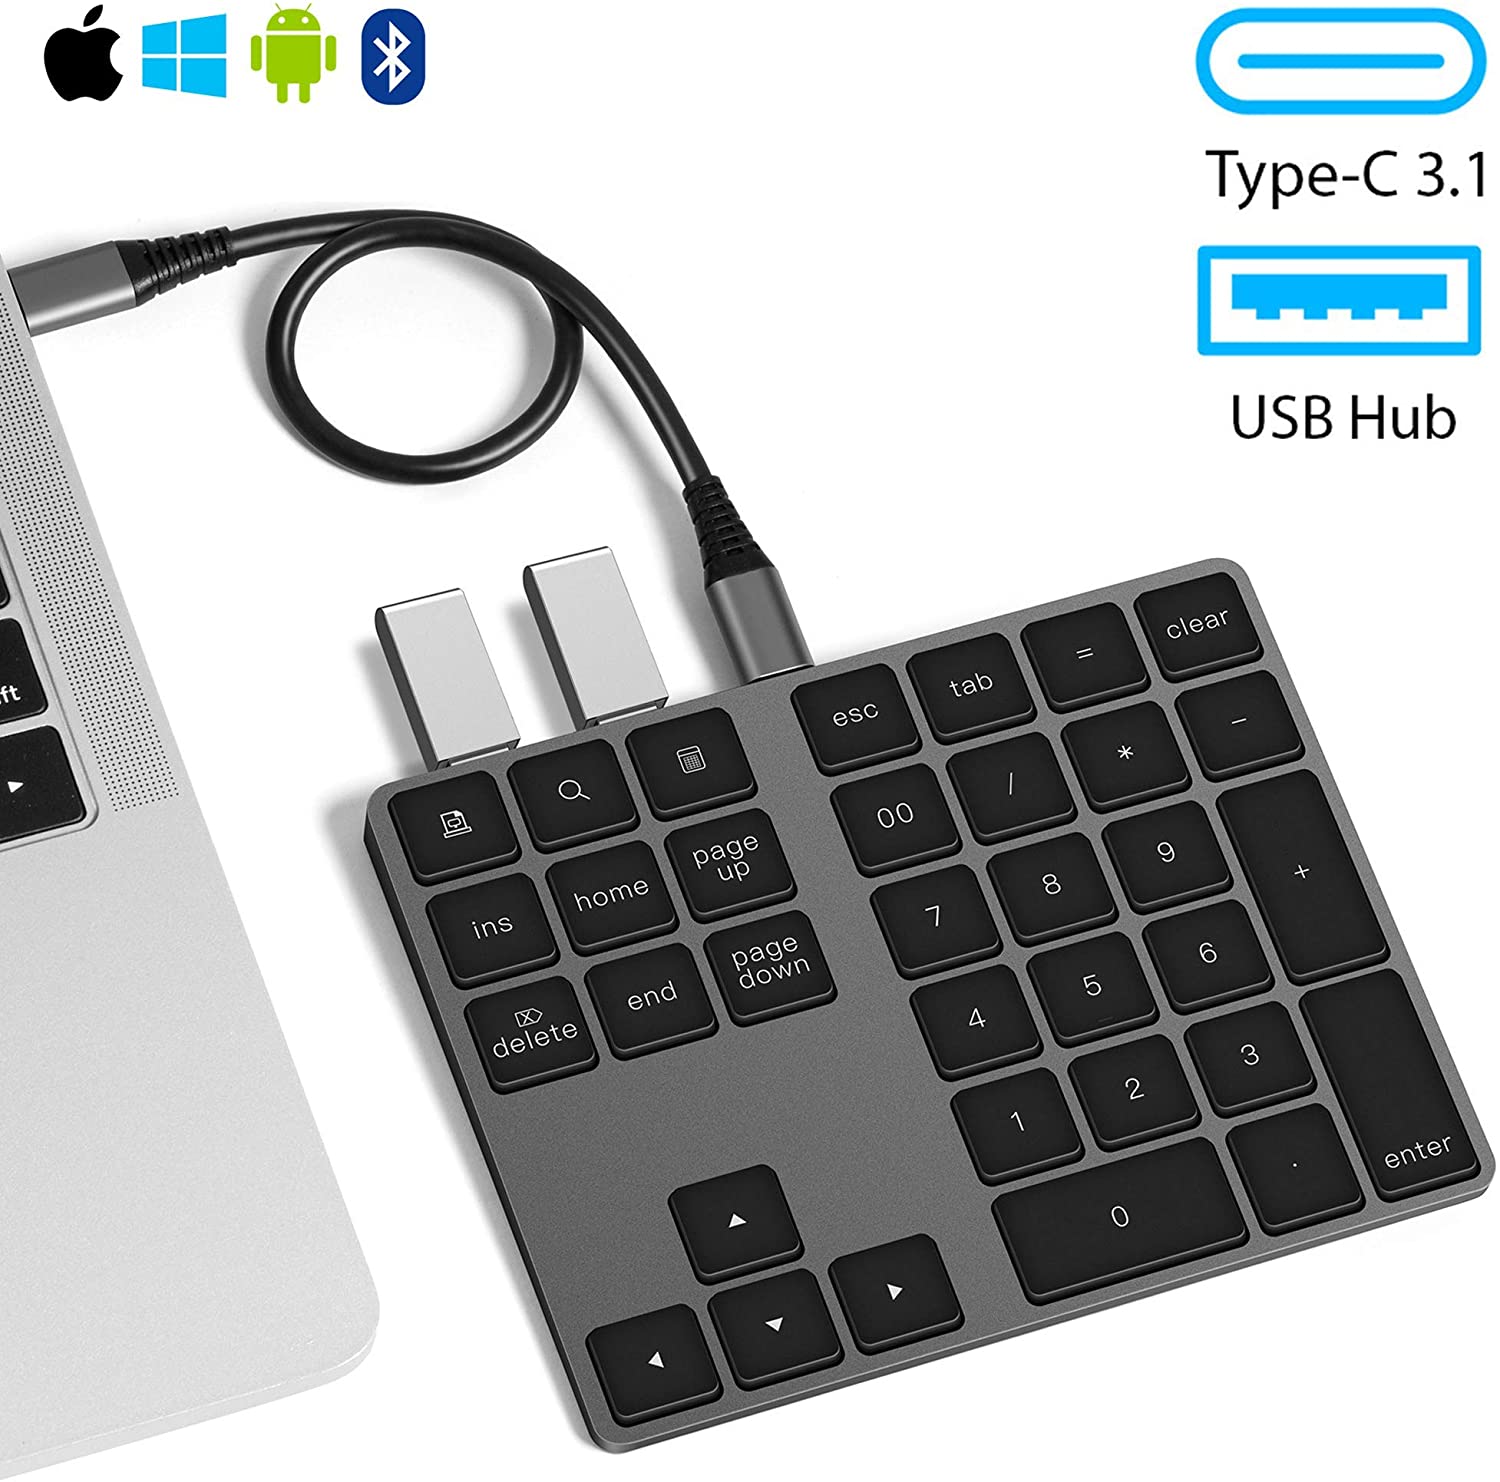 VOAMOKO USB Type-C Wireless Bluetooth Numeric Keypad with USB Hub for MacBook, MacBook Air, MacBook Pro, iPad,Surface Windows Android - External Number Pad for Laptop Tablets